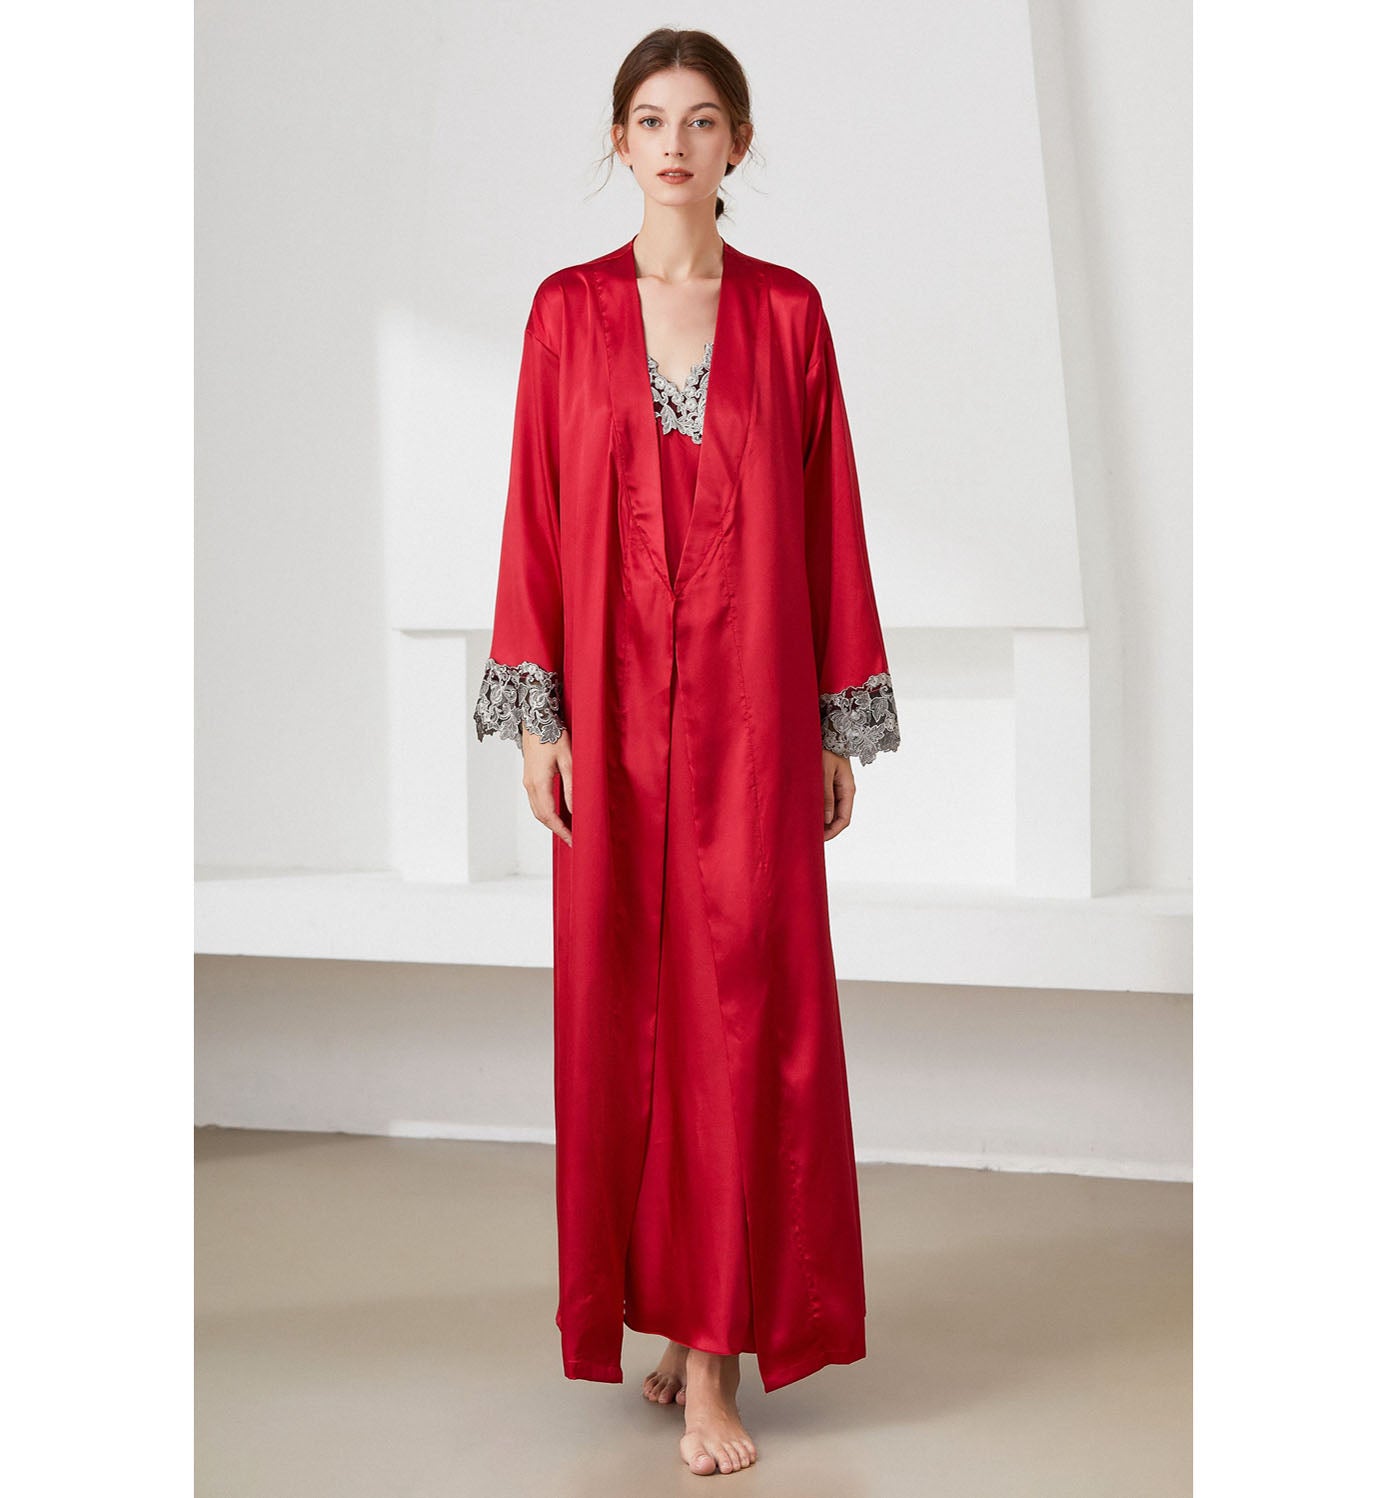 Model wearing red nightgown and robe set with lace trim